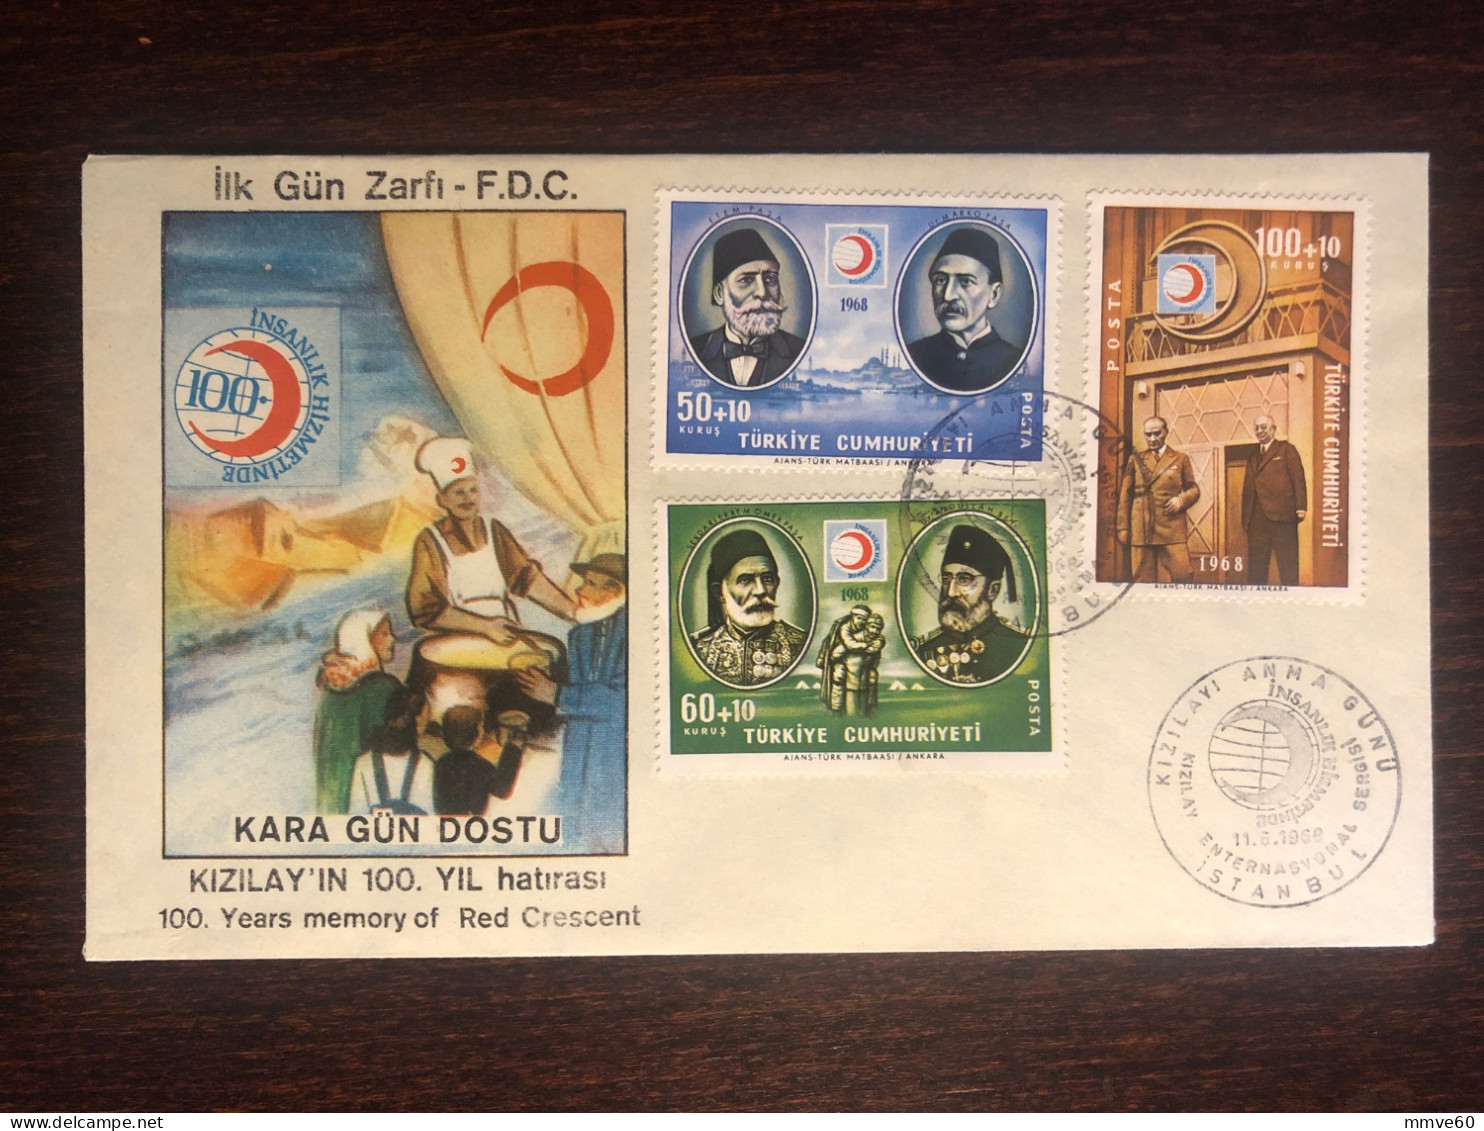 TURKEY FDC COVER 1968 YEAR RED CRESCENT RED CROSS HEALTH MEDICINE STAMPS - FDC